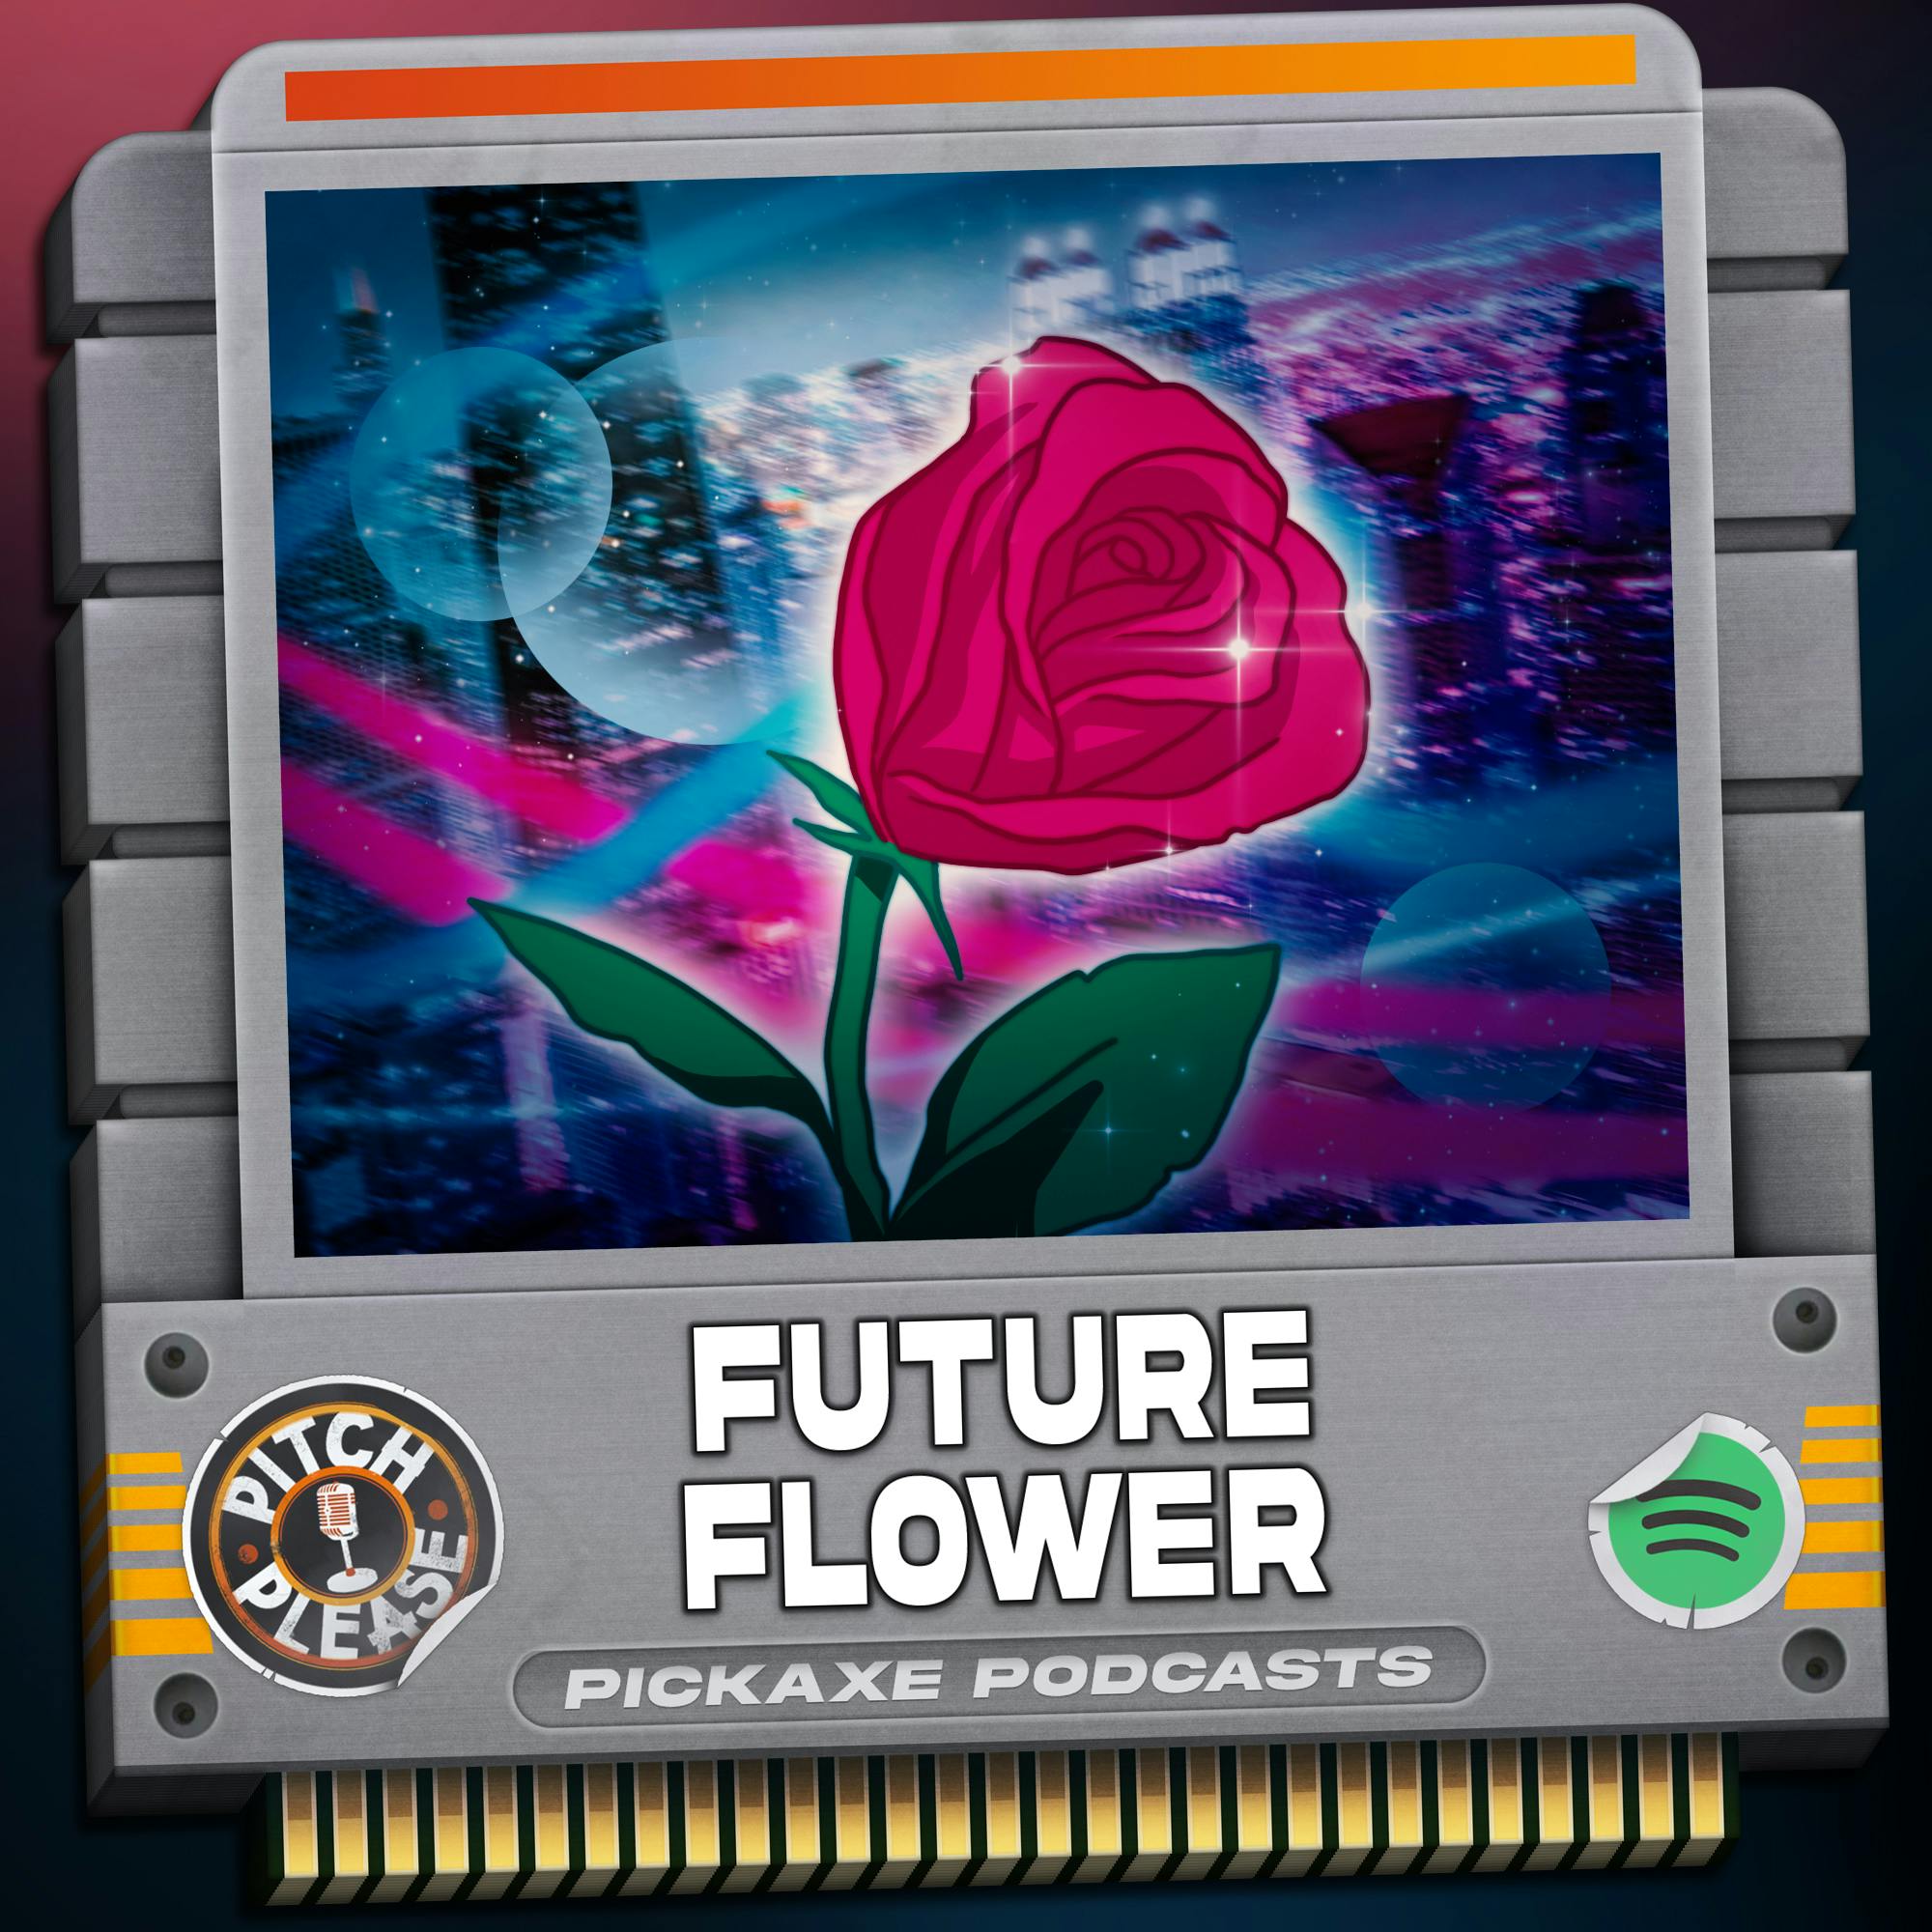 Pitch, Please - Future Flower